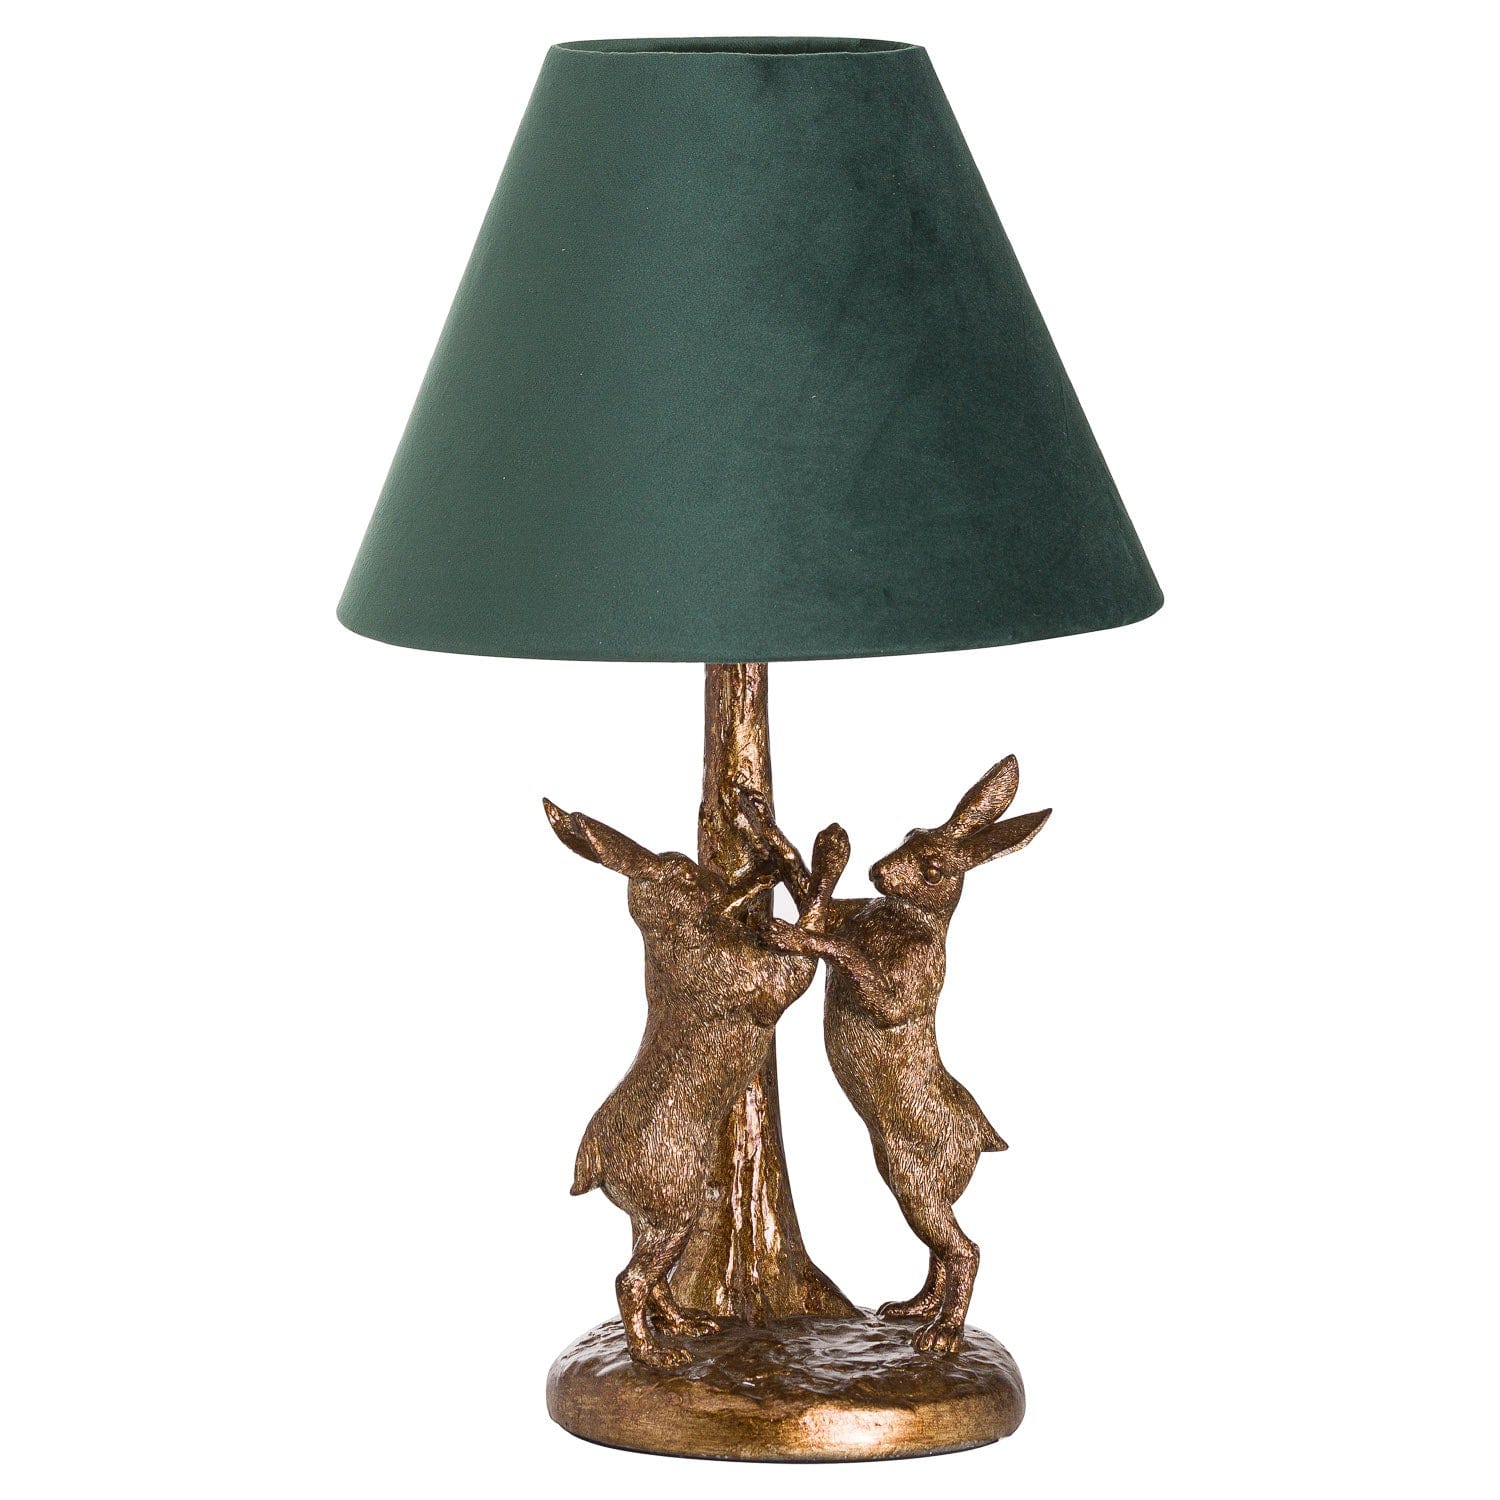 Hill Interiors Table Lamp Antique Gold Marching Hares Lamp With Green Velvet Shade